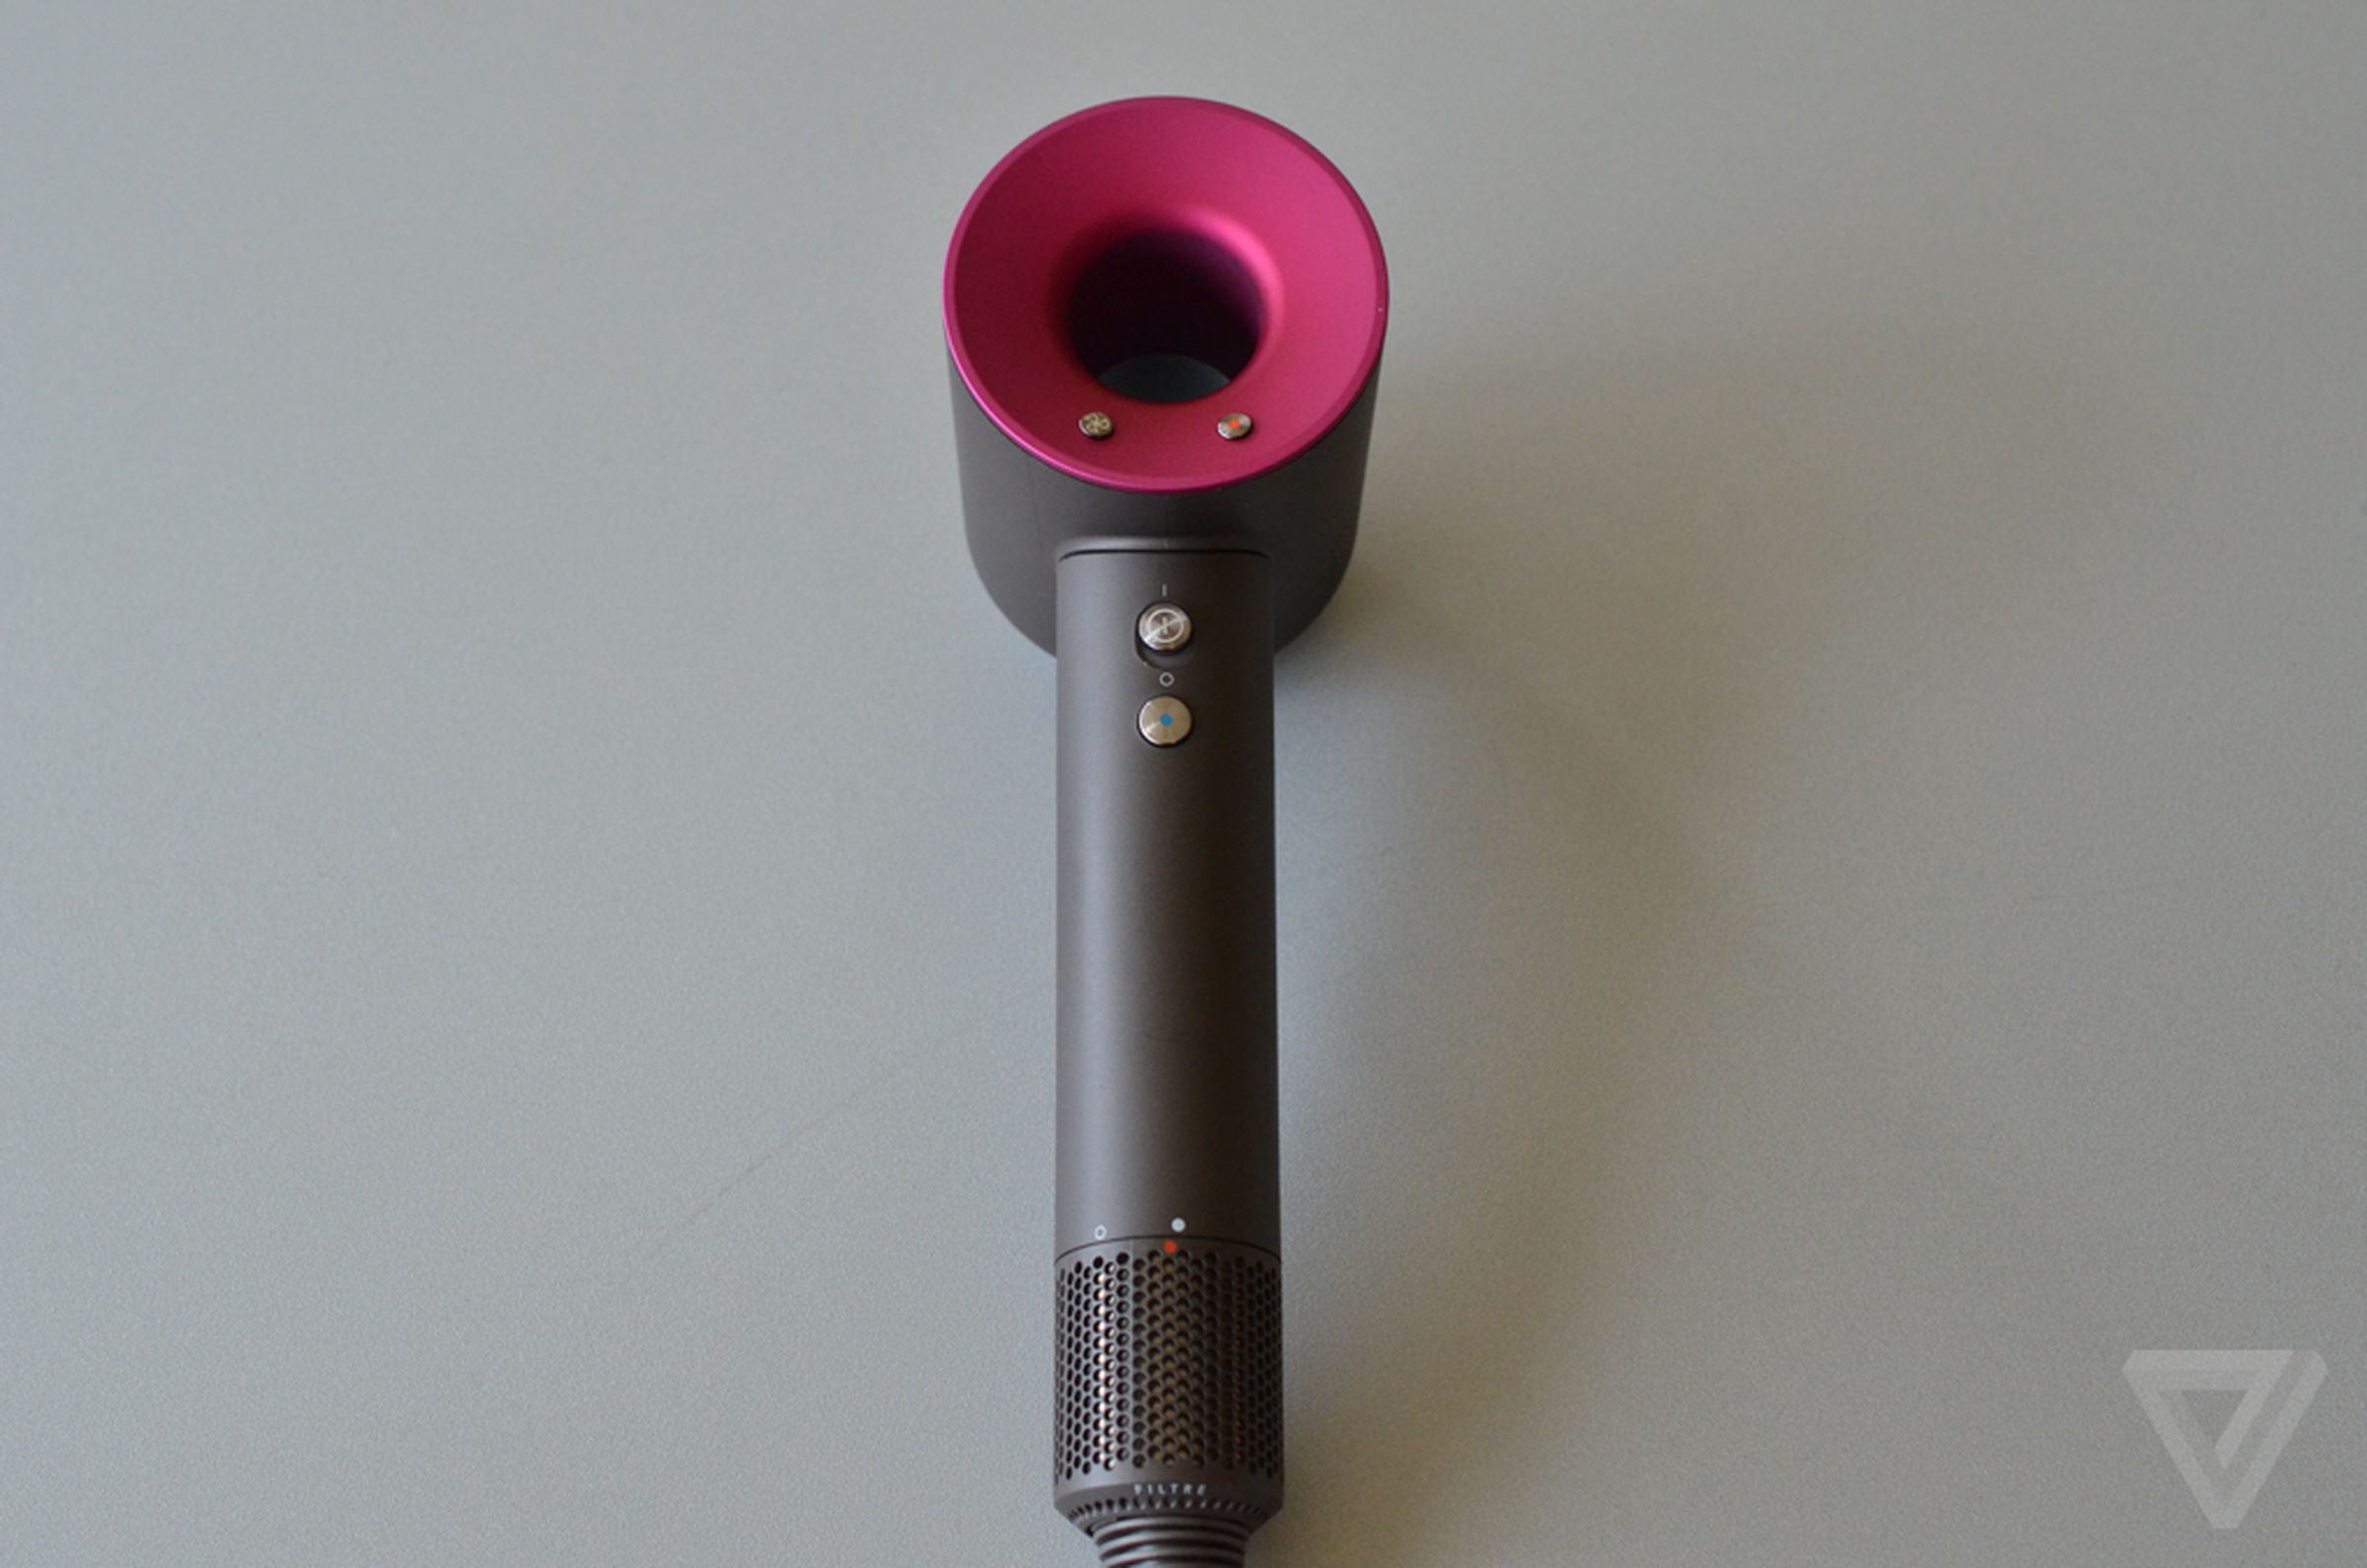 Dyson Supersonic hands-on photos